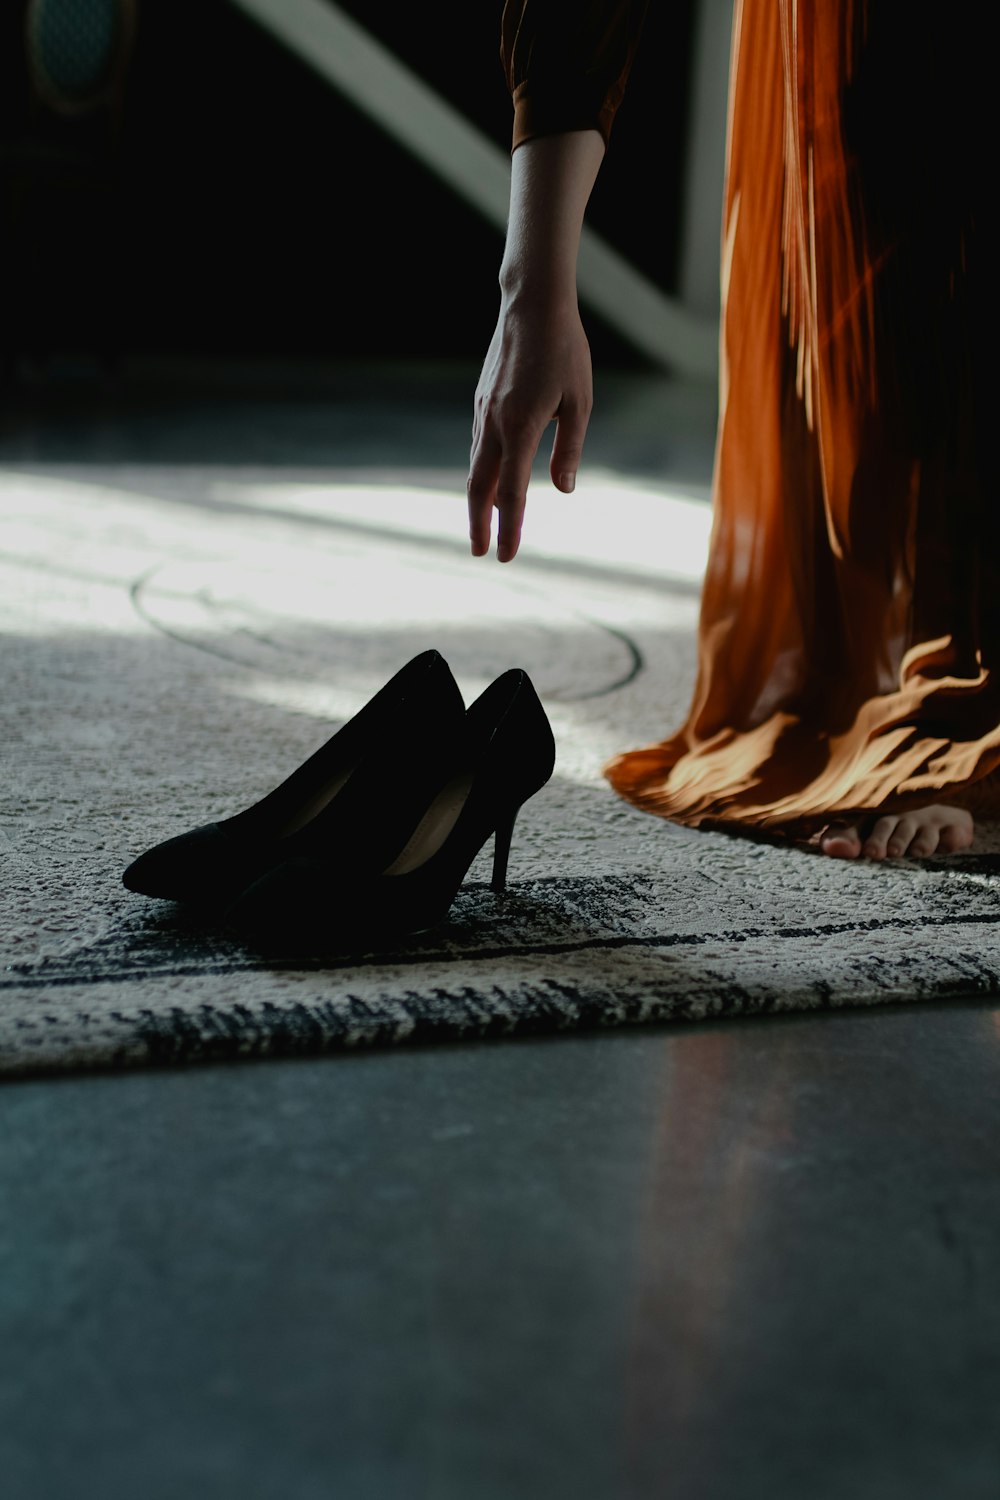 a woman is reaching for a high heeled shoe